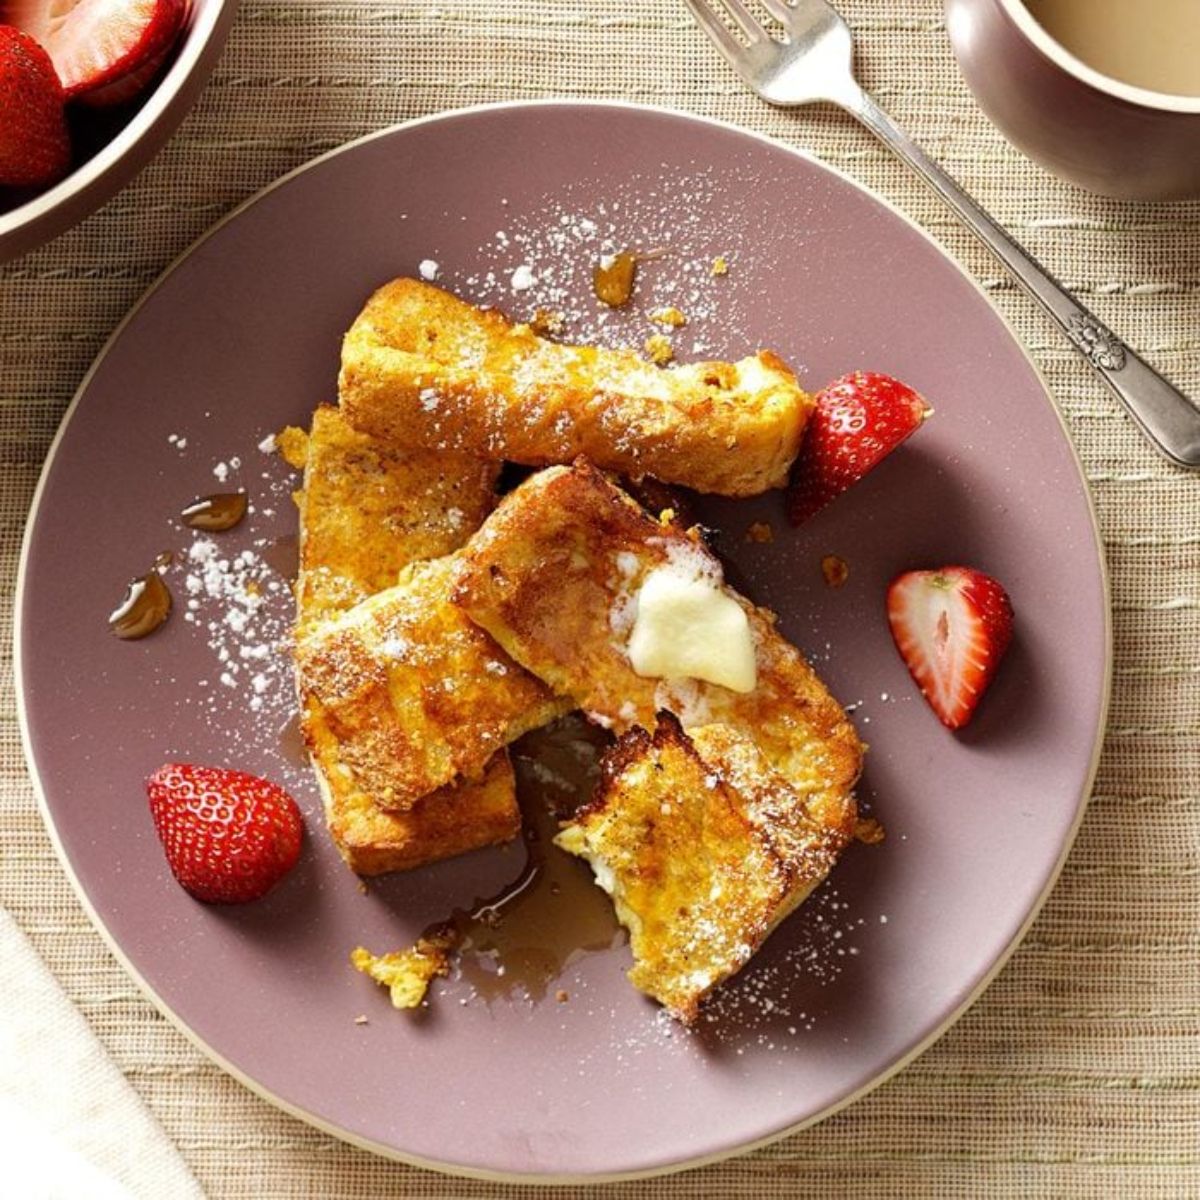 Crispy french toast sticks with strawberries on a pink plate.